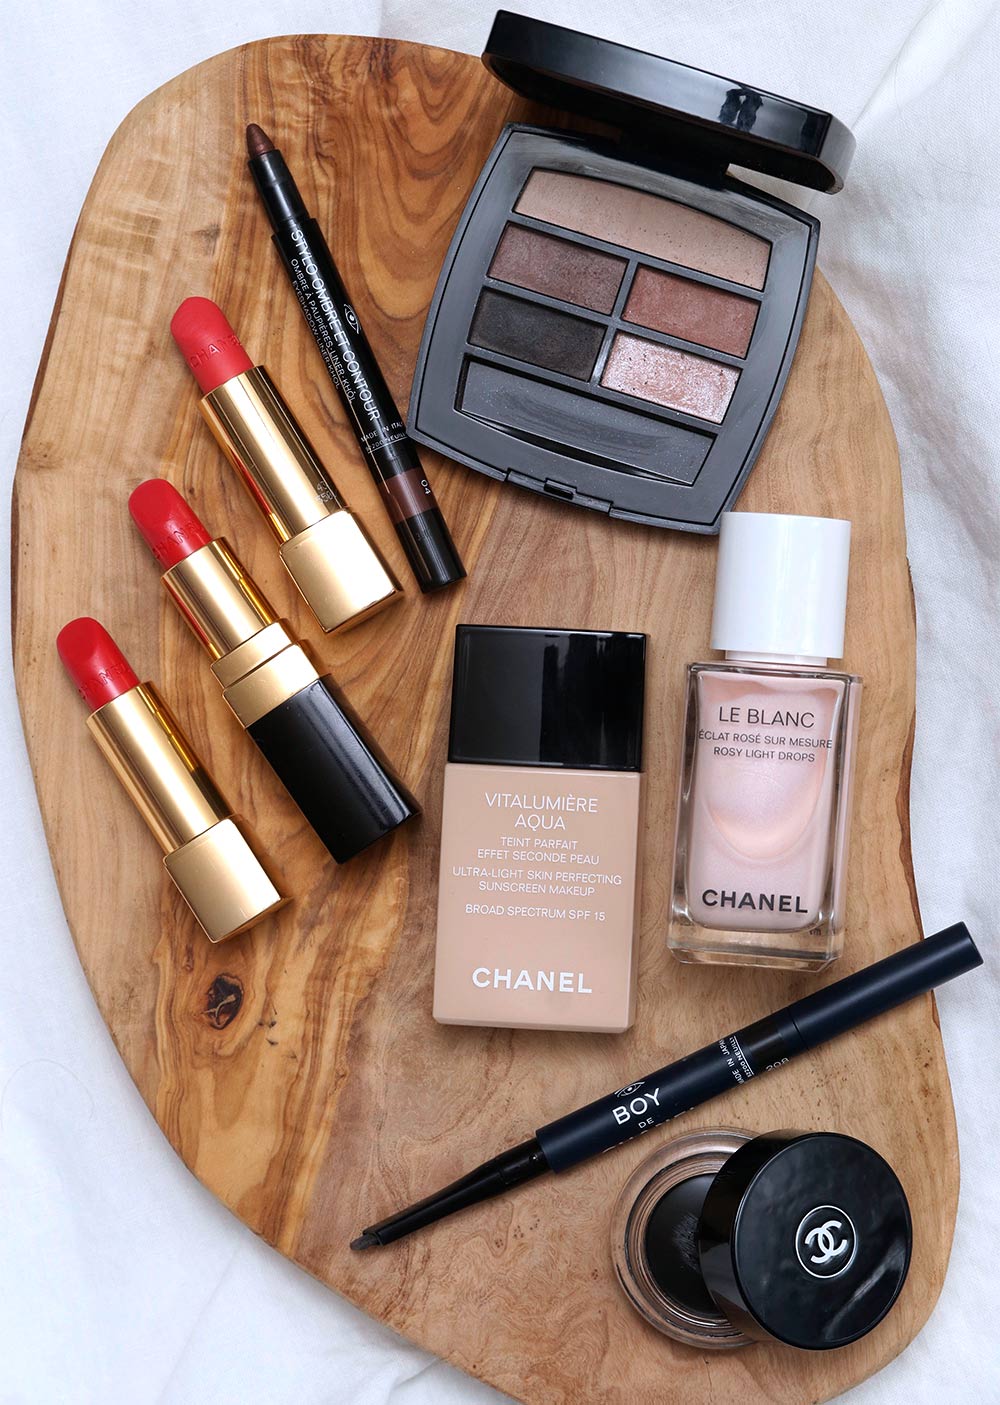 Chanel Reviews, Swatches and Pictures on Makeup and Beauty Blog